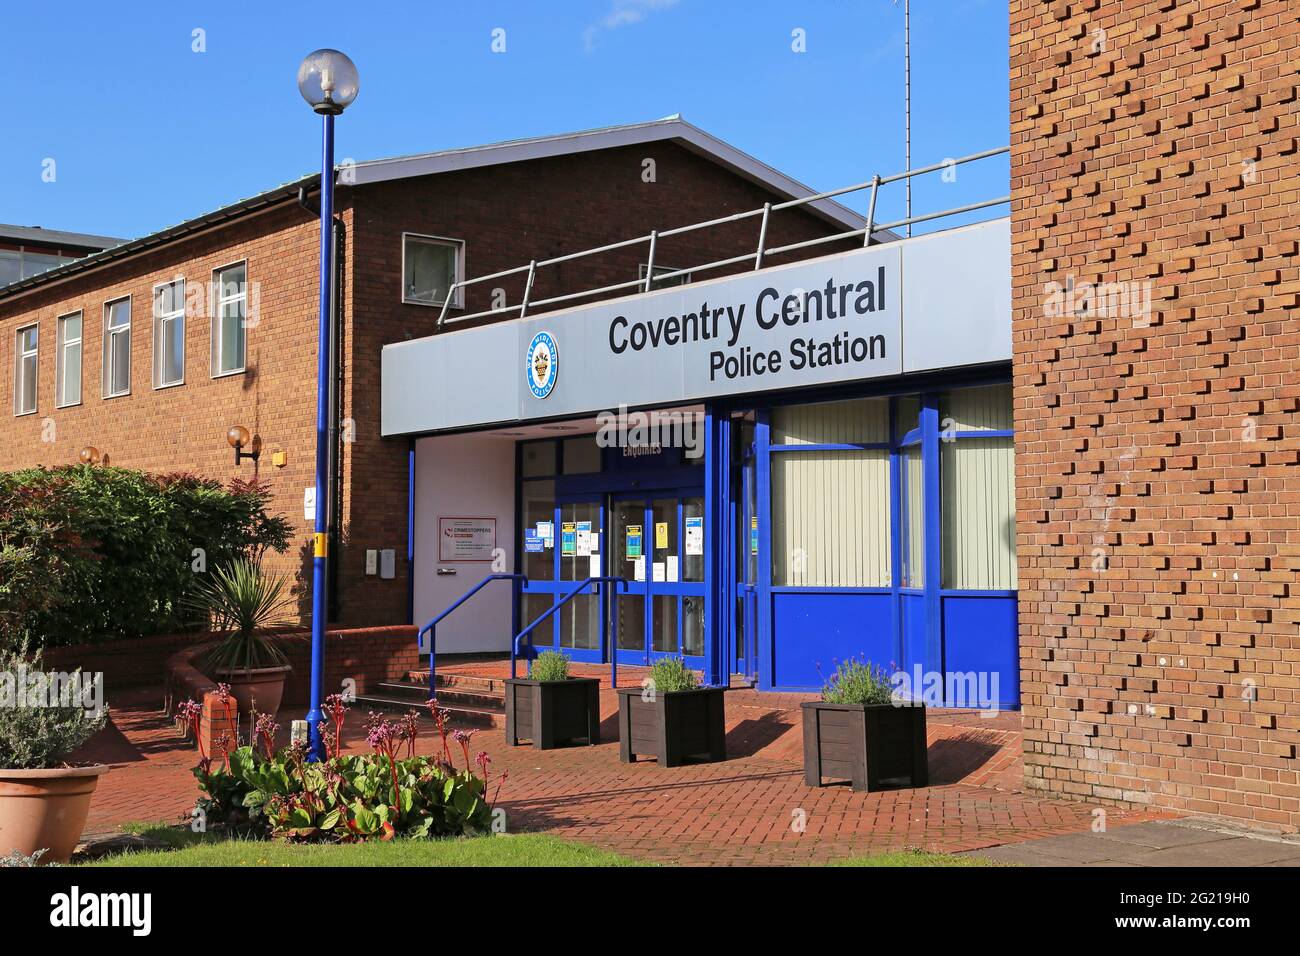 Coventry Central Police Station, Little Park Street, City centre, Coventry, West Midlands, England, Great Britain, UK, Europe Stock Photo